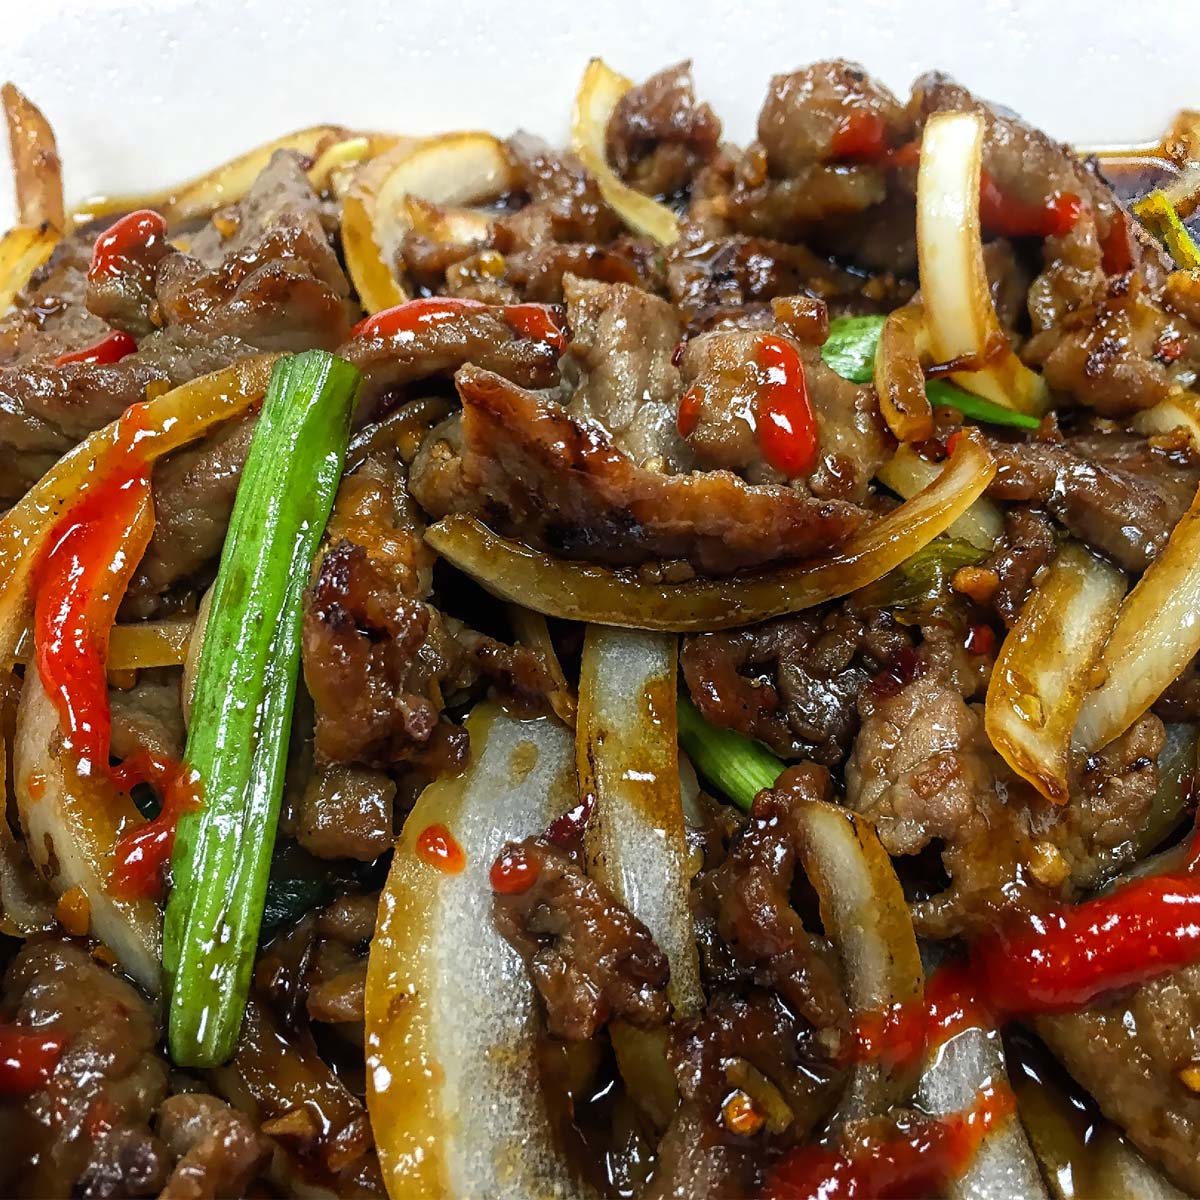 Moo Shu Beef is a classic Chinese dish that features tender slices of marinated beef stir-fried with a colorful mix of vegetables and served with a delicious, savory hoisin sauce.